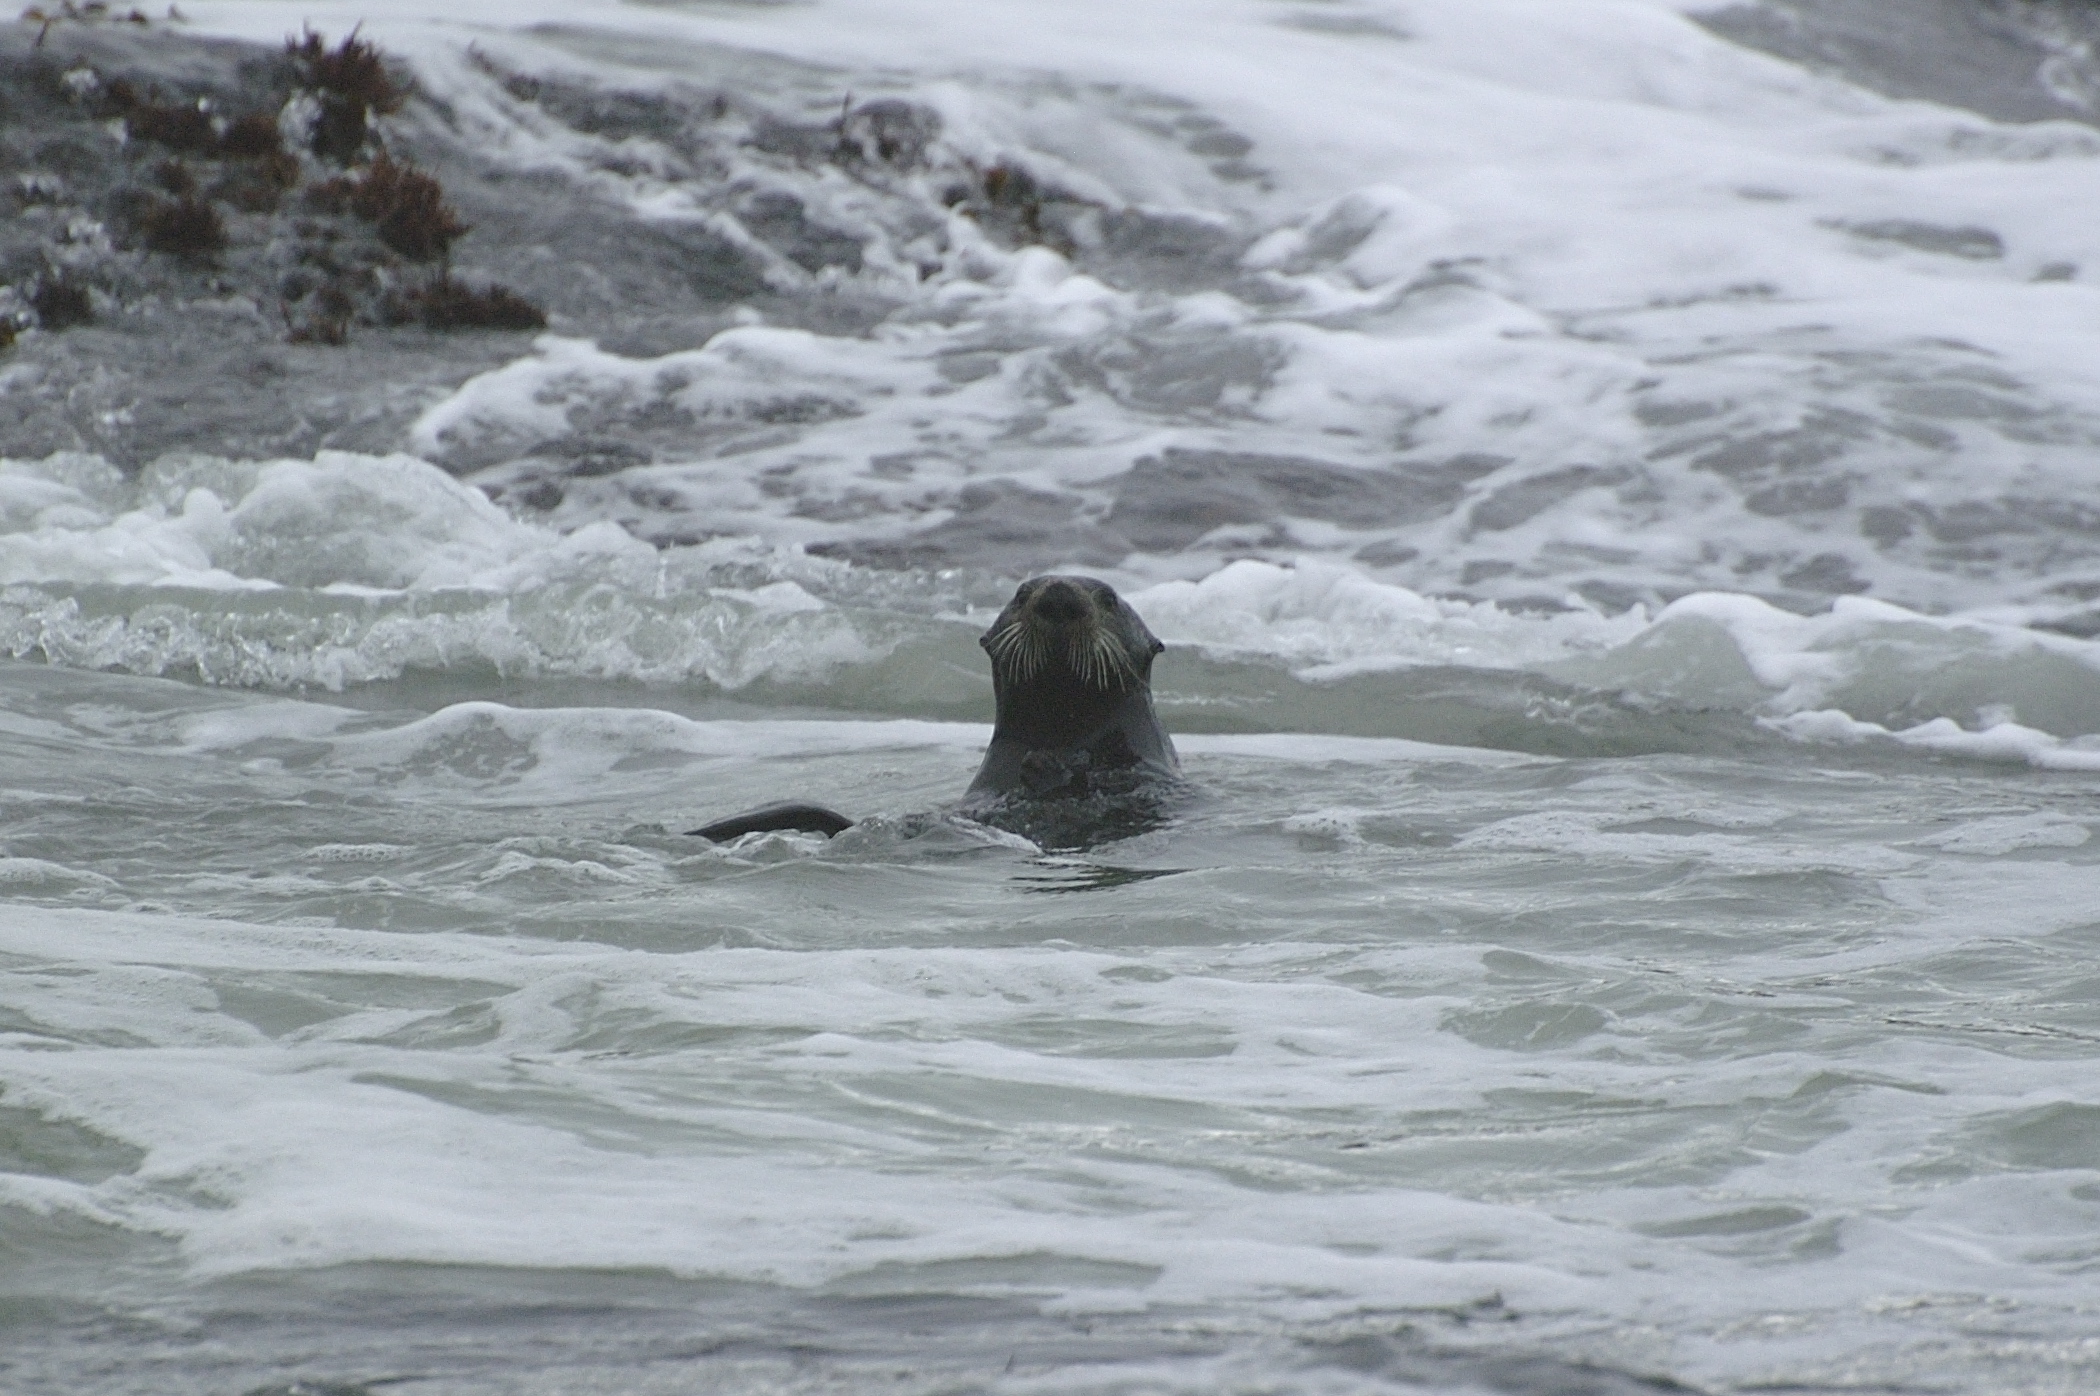 a seal is swimming in the rough ocean water